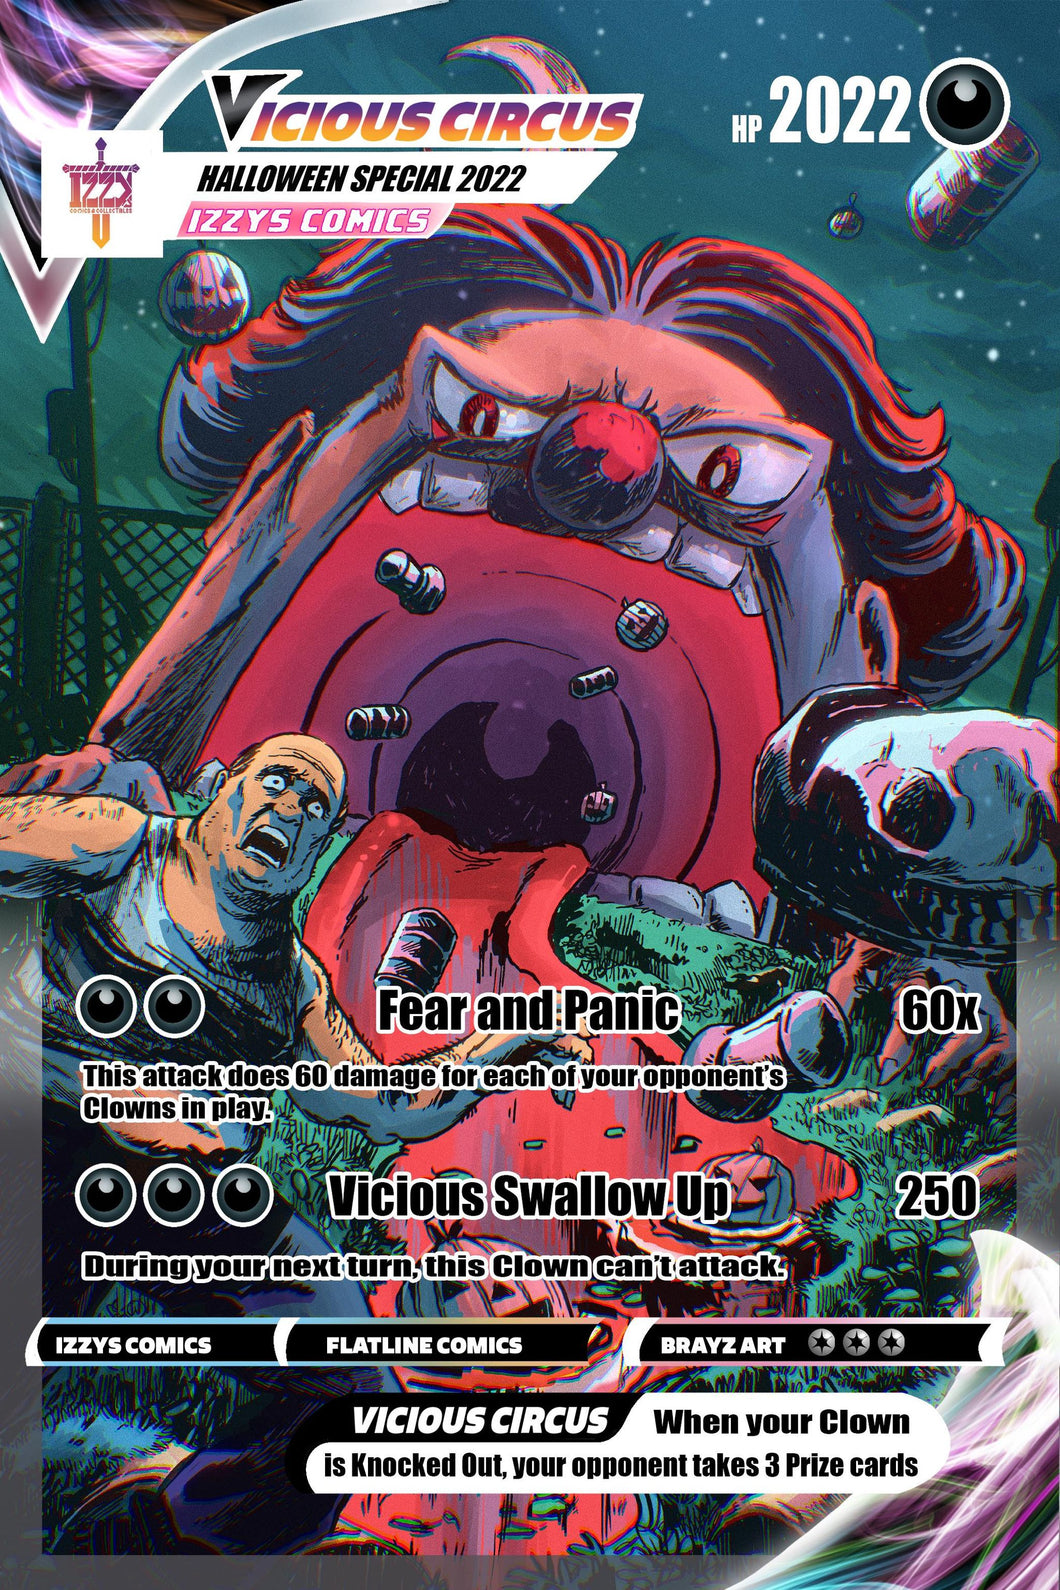 Vicious Circus 2022 Halloween Special - Izzy's Comics Exclusive - Cover by BrayzArt - Pokemon Gengar Alt Art Homage